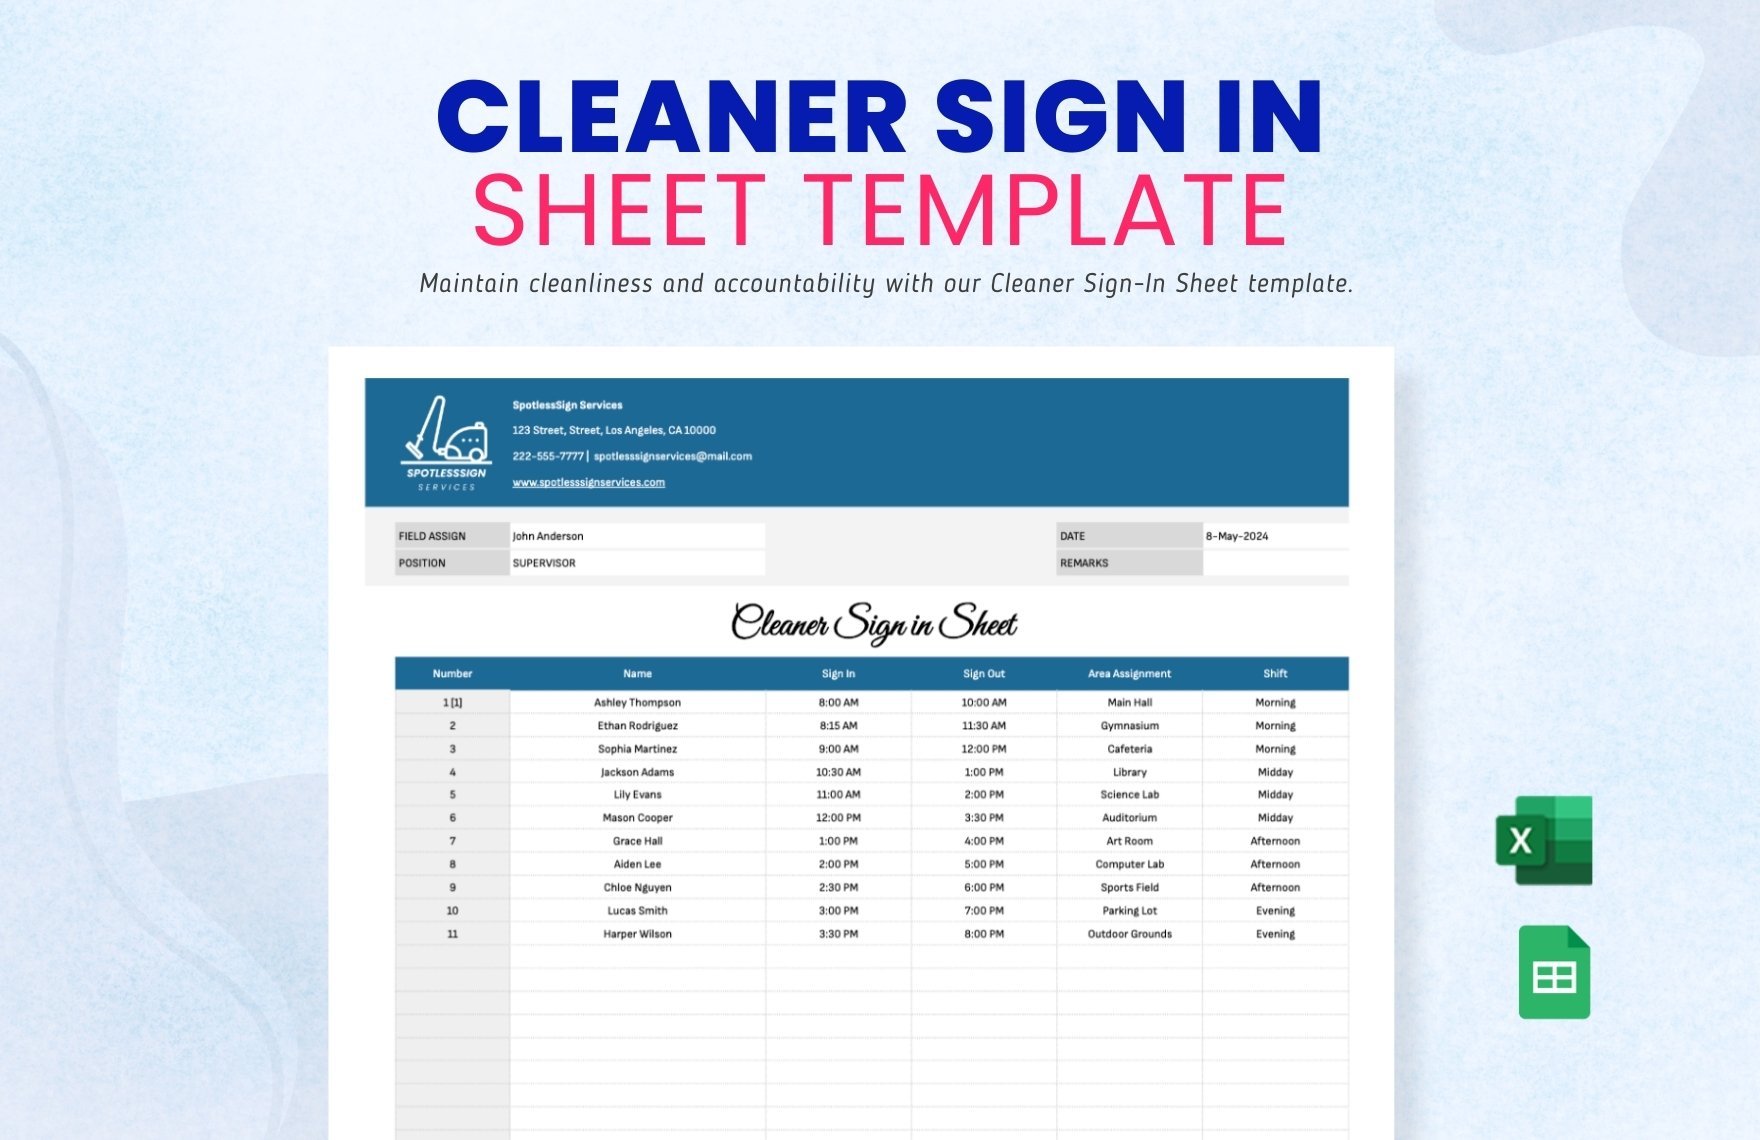 Cleaner Sign in Sheet Template in Excel, Google Sheets